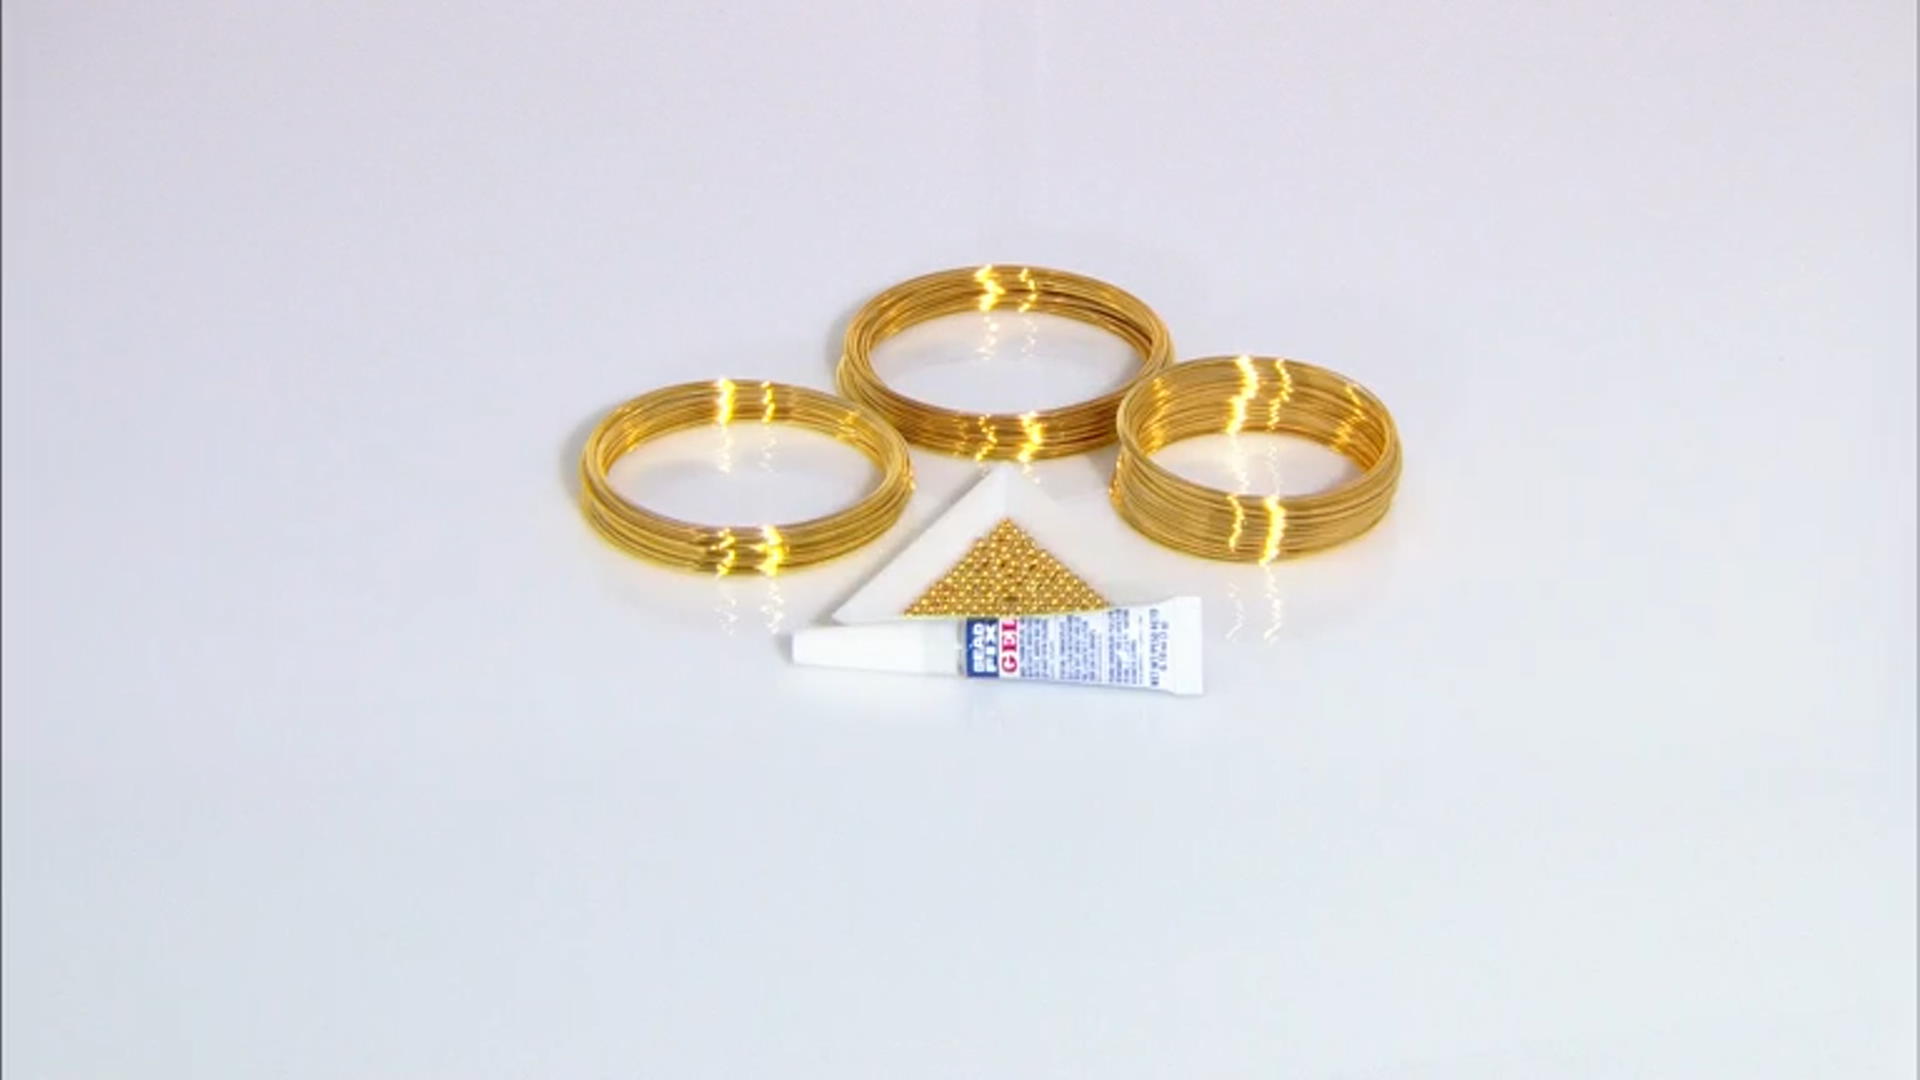 Bracelet Memory Wire 3 Ounces Total in Gold Tone in 3 sizes with End Caps & Glue Video Thumbnail